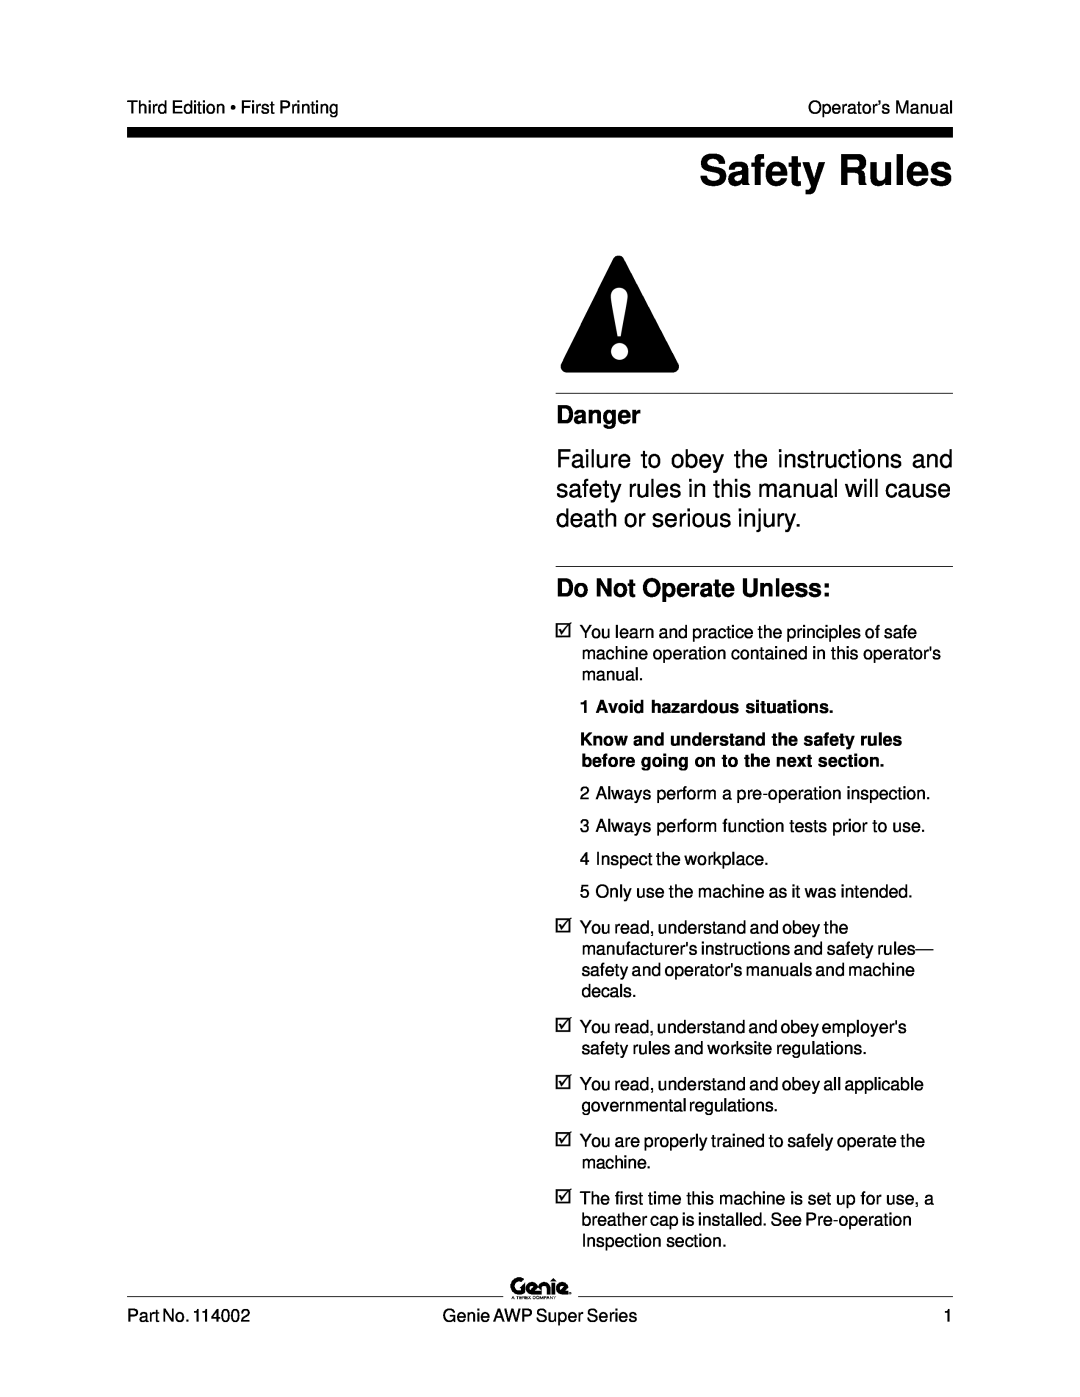 Genie 114002 manual Safety Rules, Danger, Do Not Operate Unless, Avoid hazardous situations 